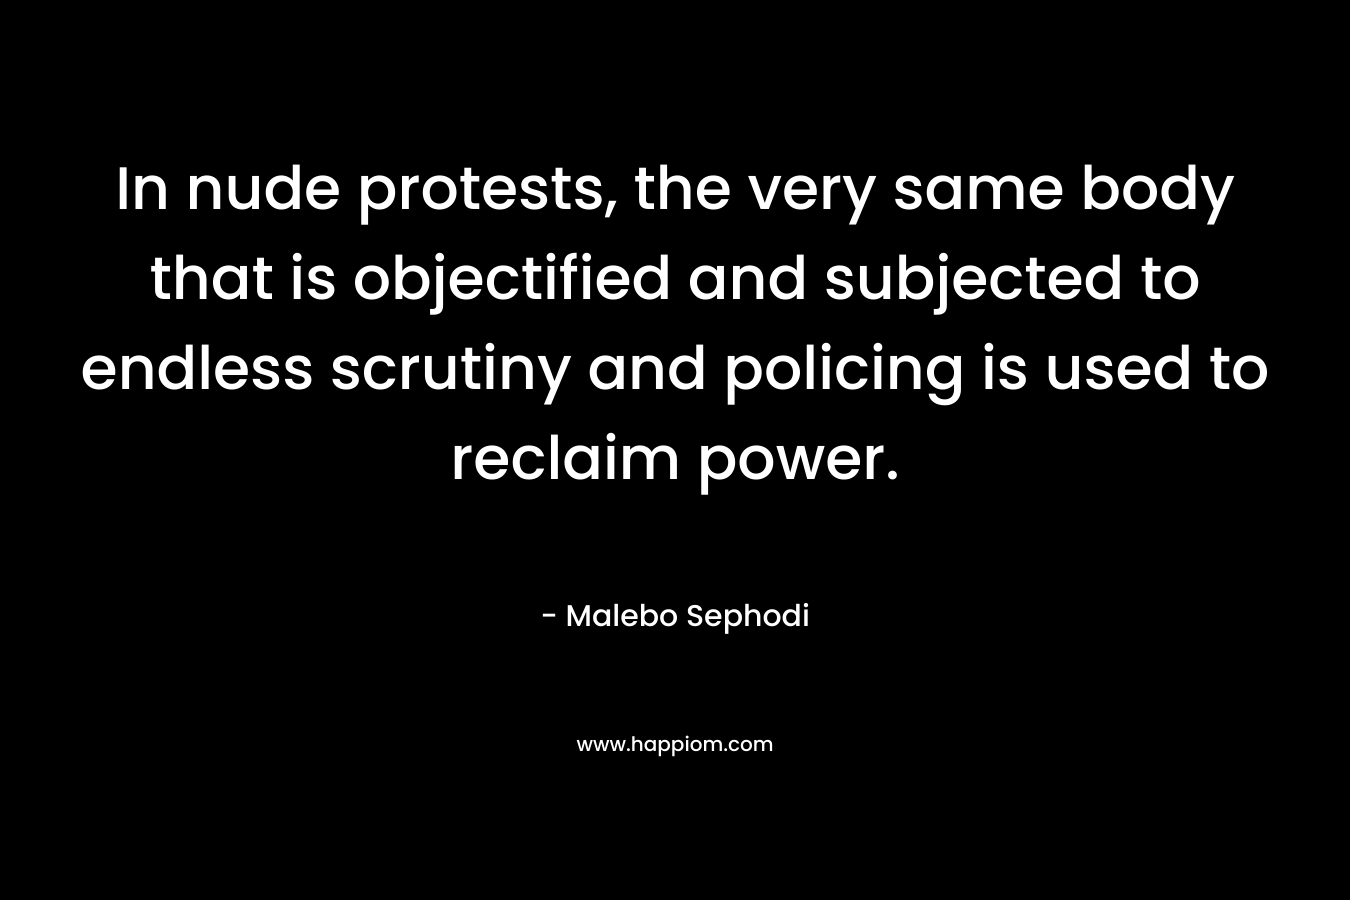 In nude protests, the very same body that is objectified and subjected to endless scrutiny and policing is used to reclaim power. – Malebo Sephodi